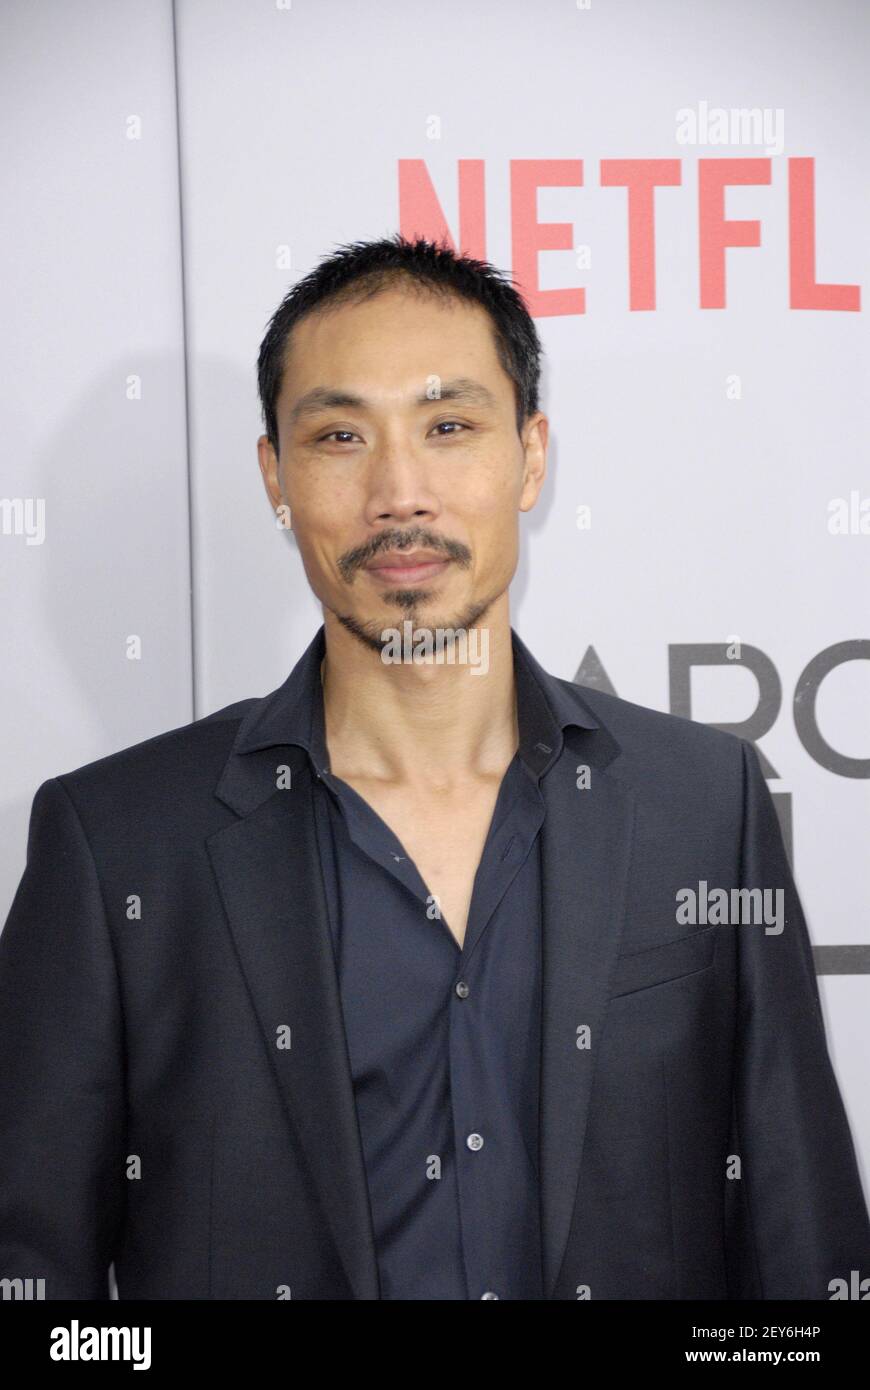 New York, NY - Tom Wu arrives at the premiere of Marco Polo, a series on  Netflix, at the AMC Lincoln Square Theater in New York City on Dec. 2,  2014. (Photo